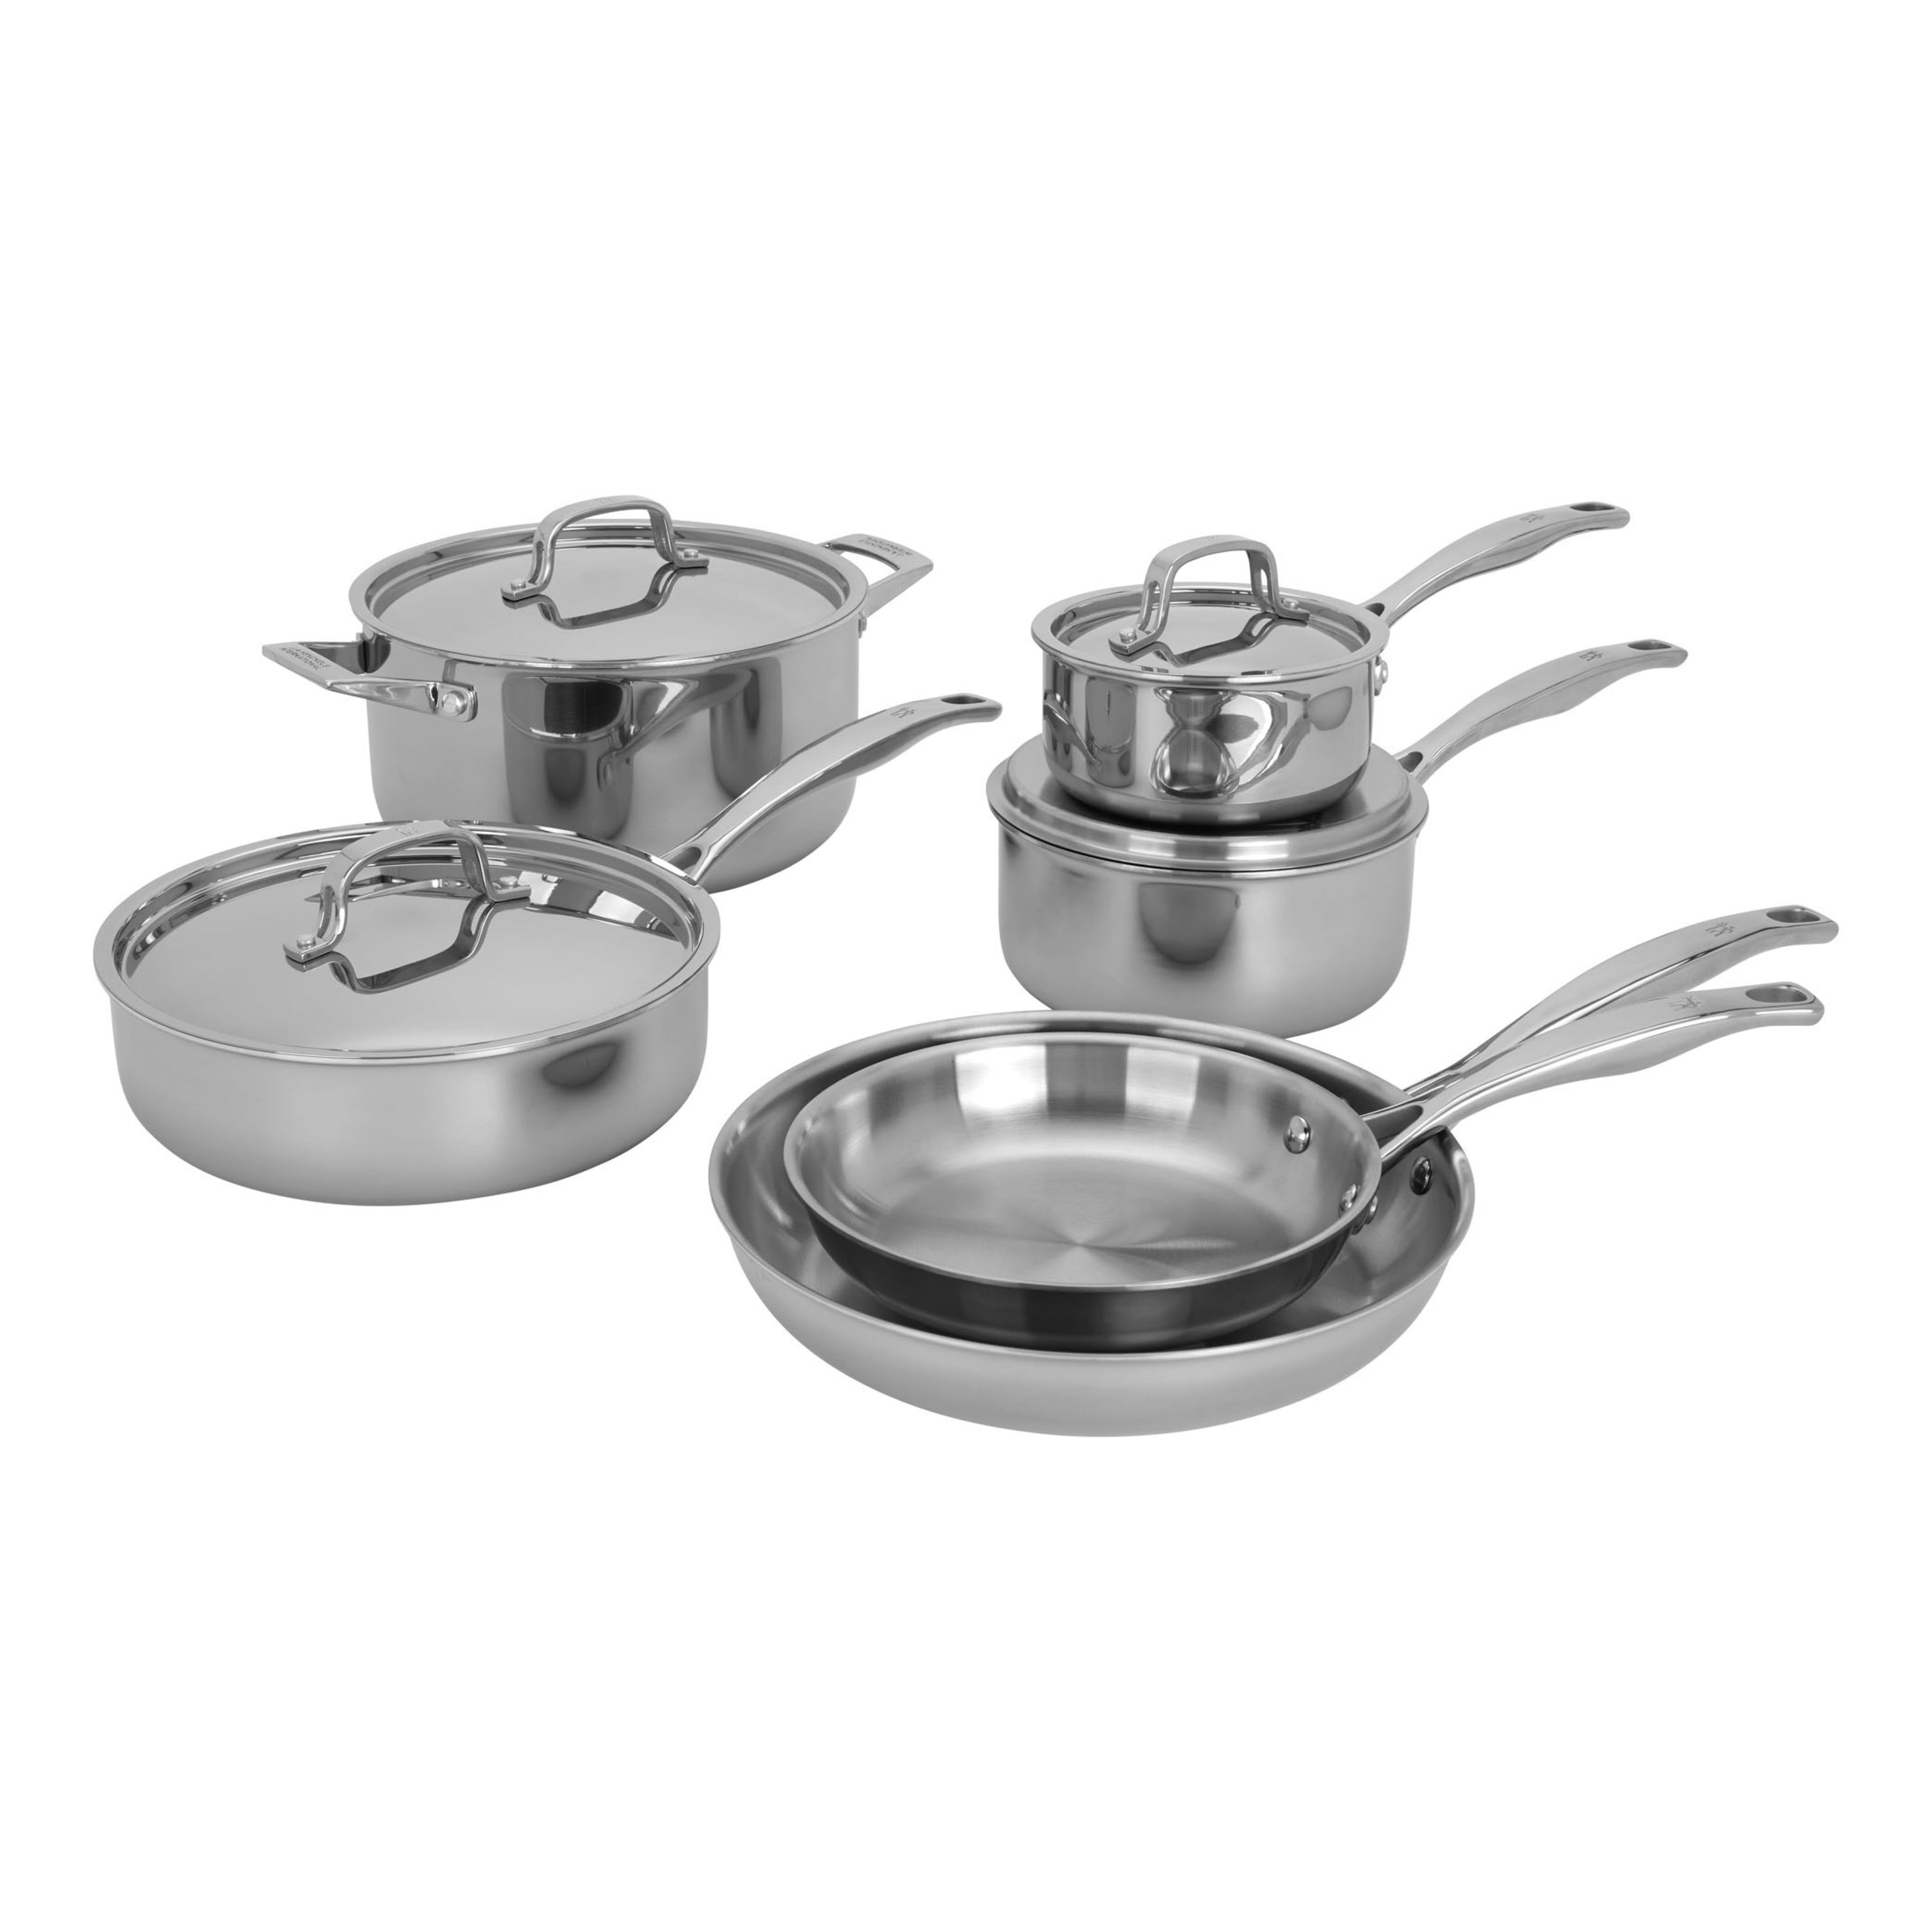 ZWILLING Clad Xtreme 10-Piece Polished Stainless Steel Cookware